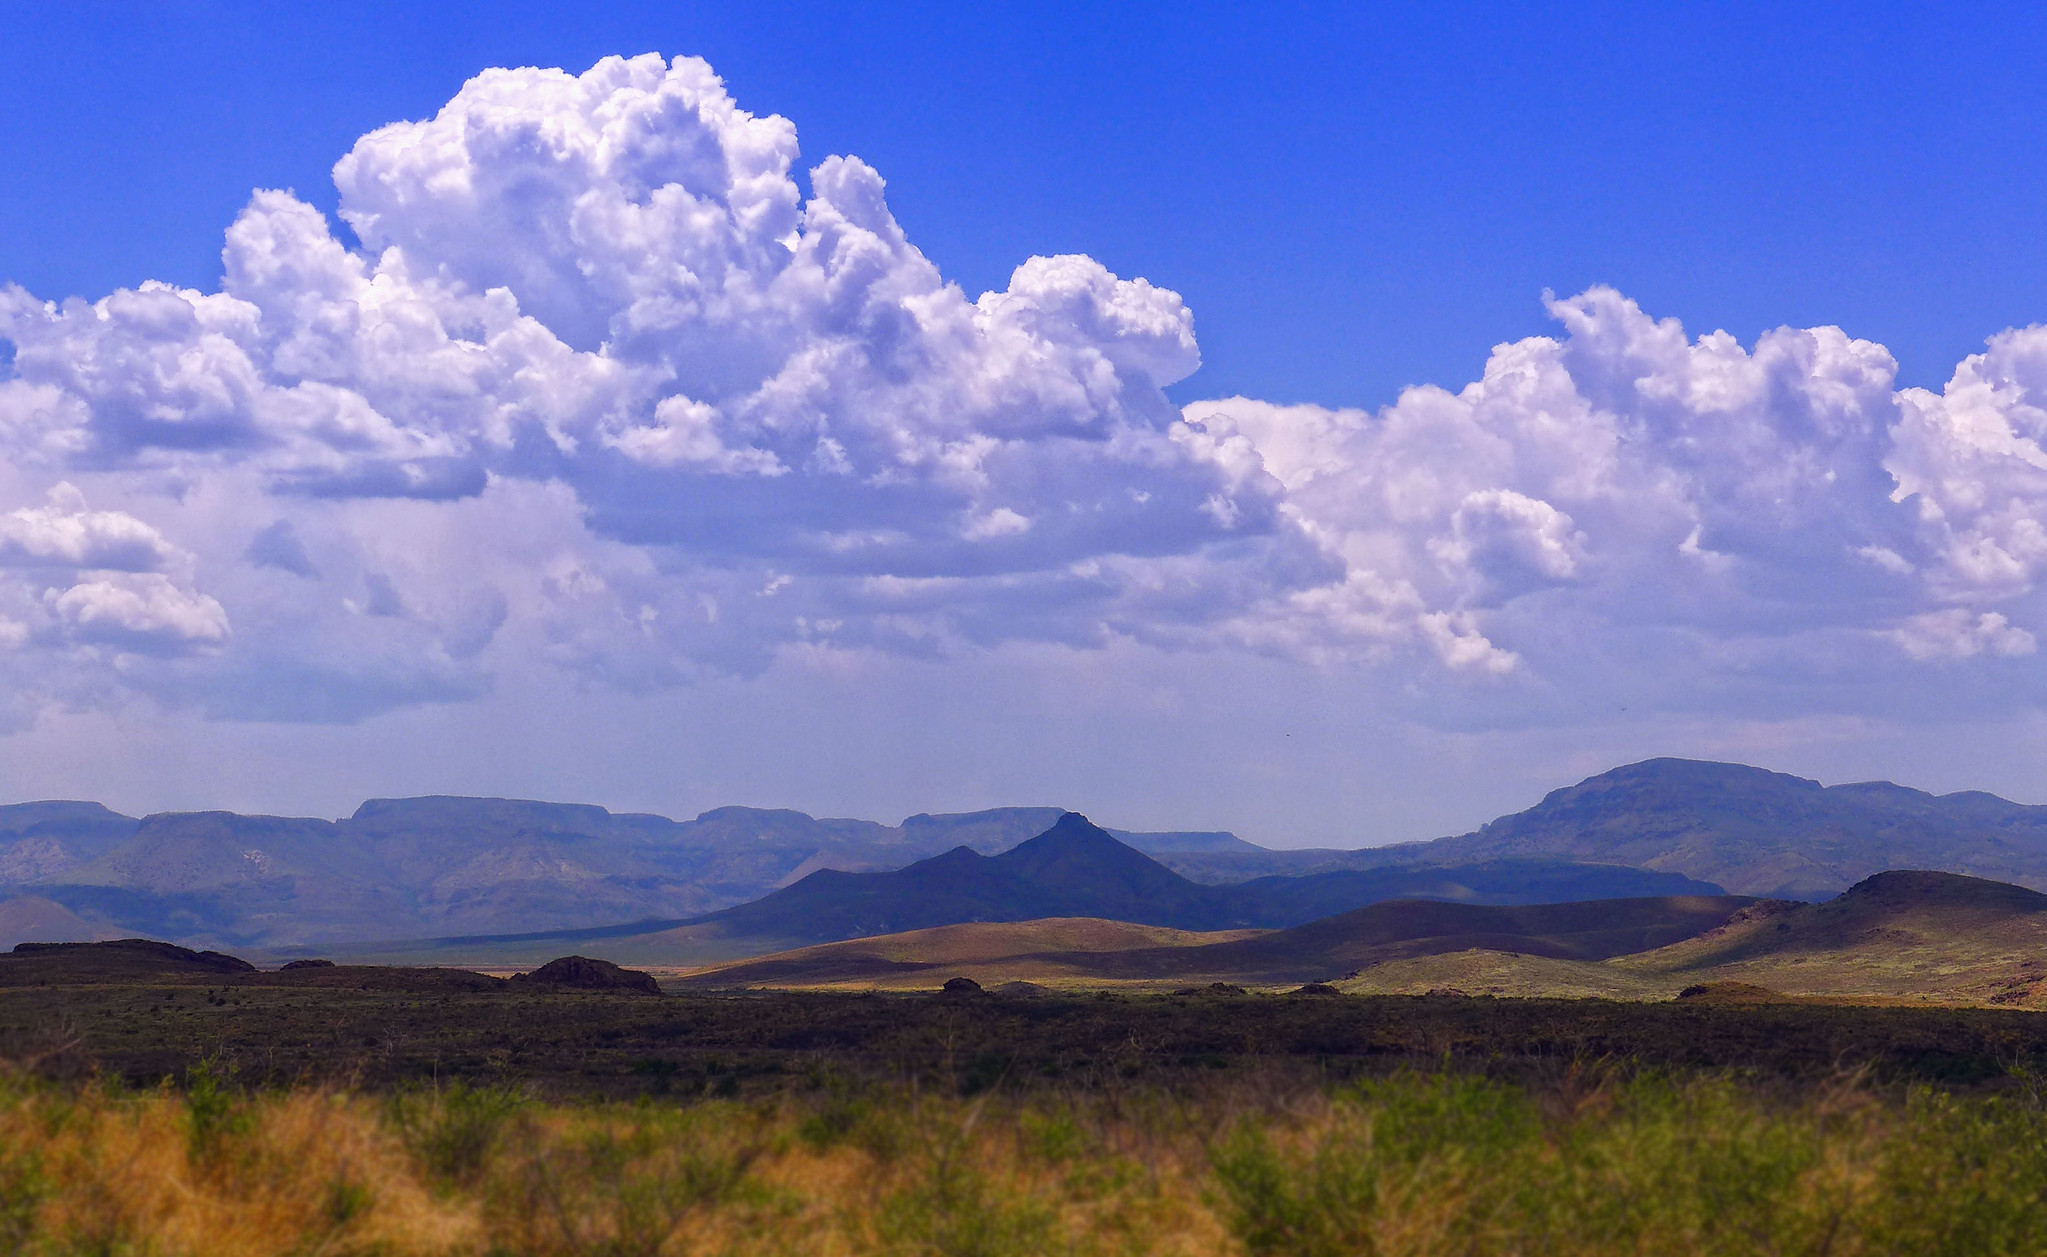 Photograph of the Davis Mountains in western Texas.